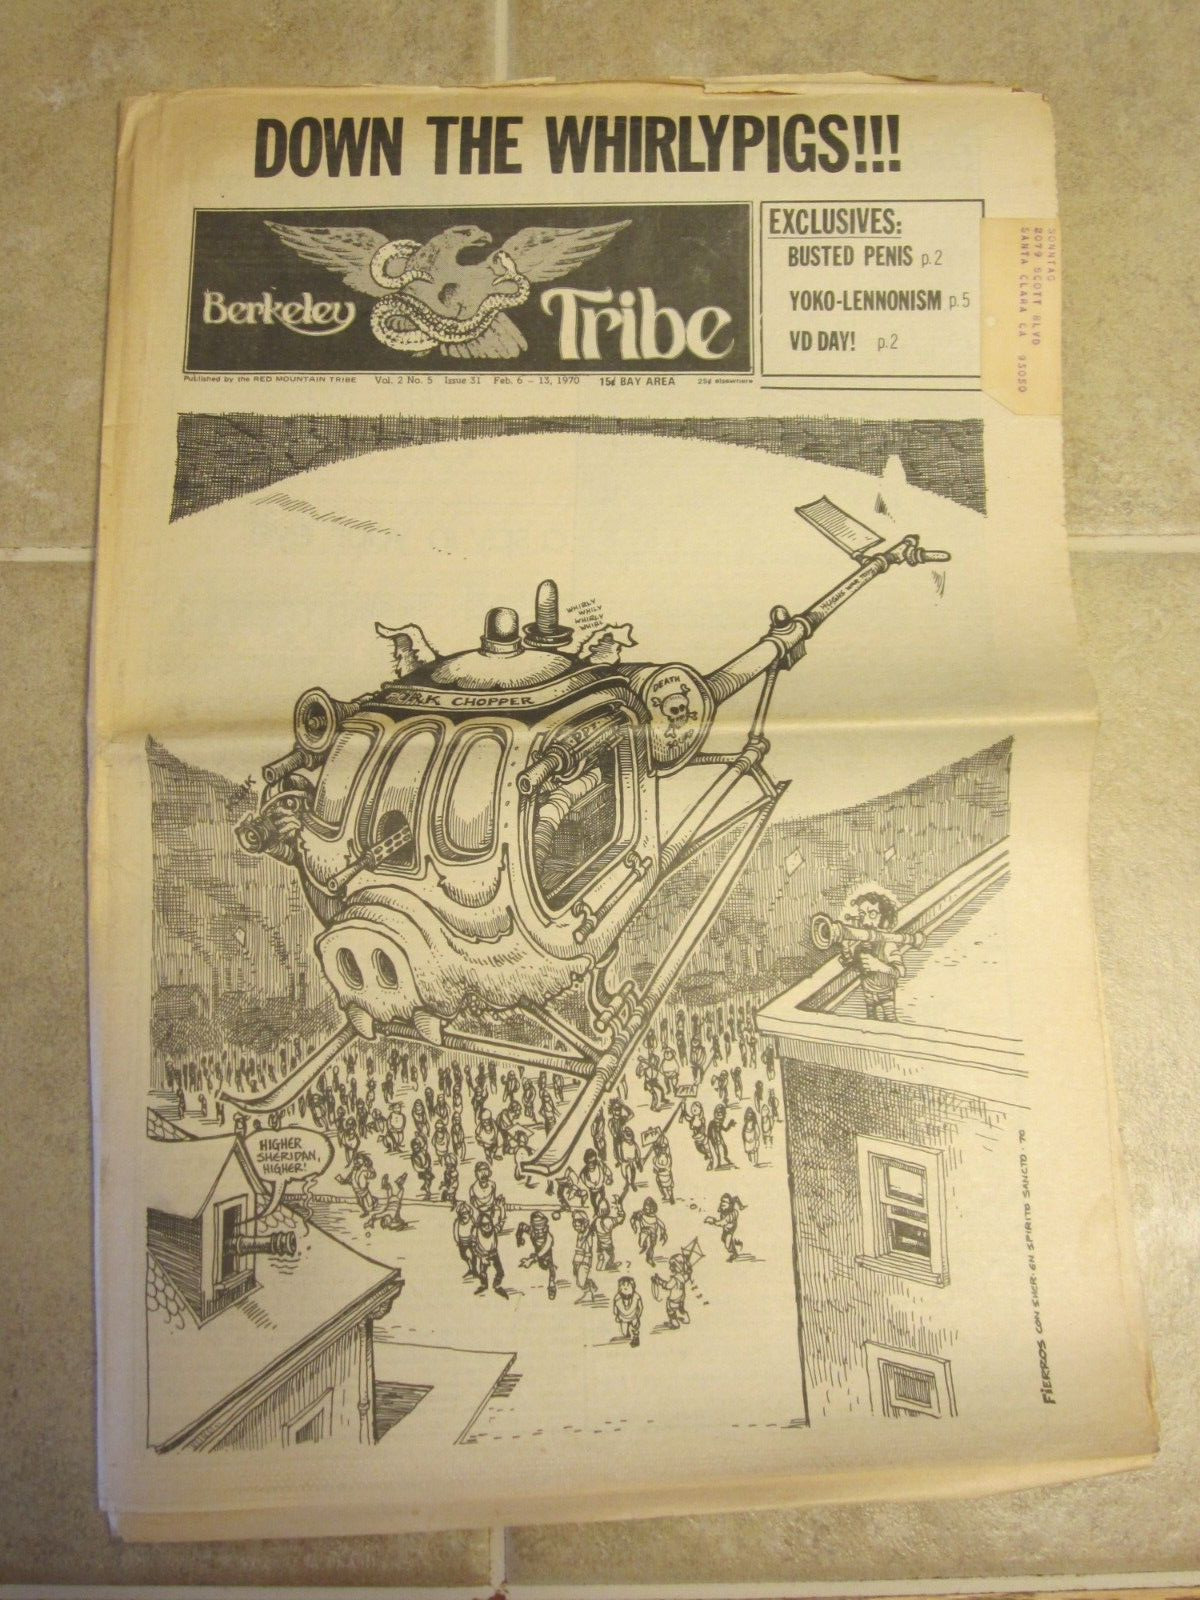 Berkeley Tribe Newspaper February 1970 Down the Whirlypigs Amazing Centerfold